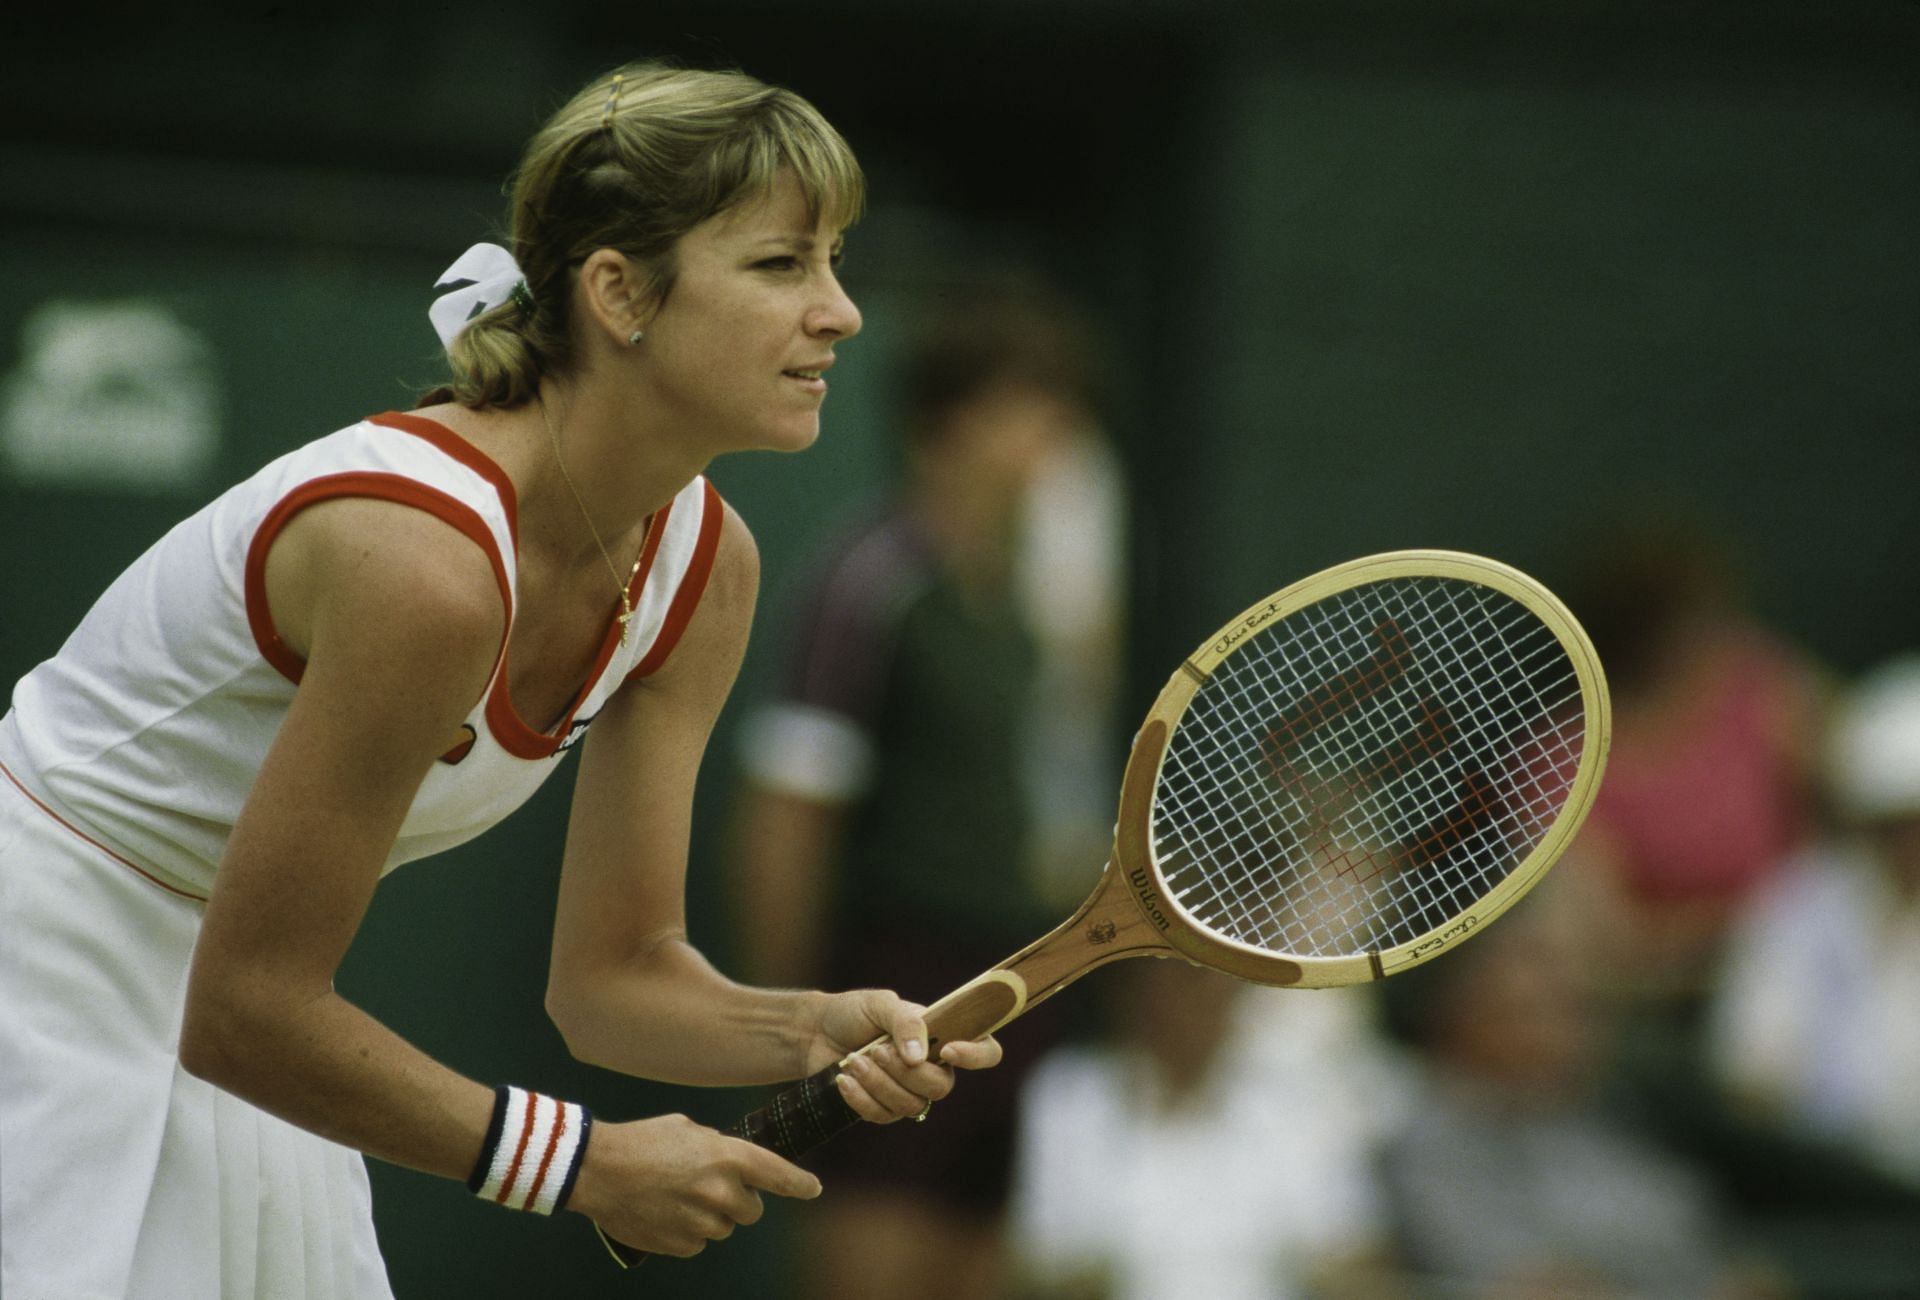 Chris Evert remembers her 22-year-old self at Wimbledon with fondness 